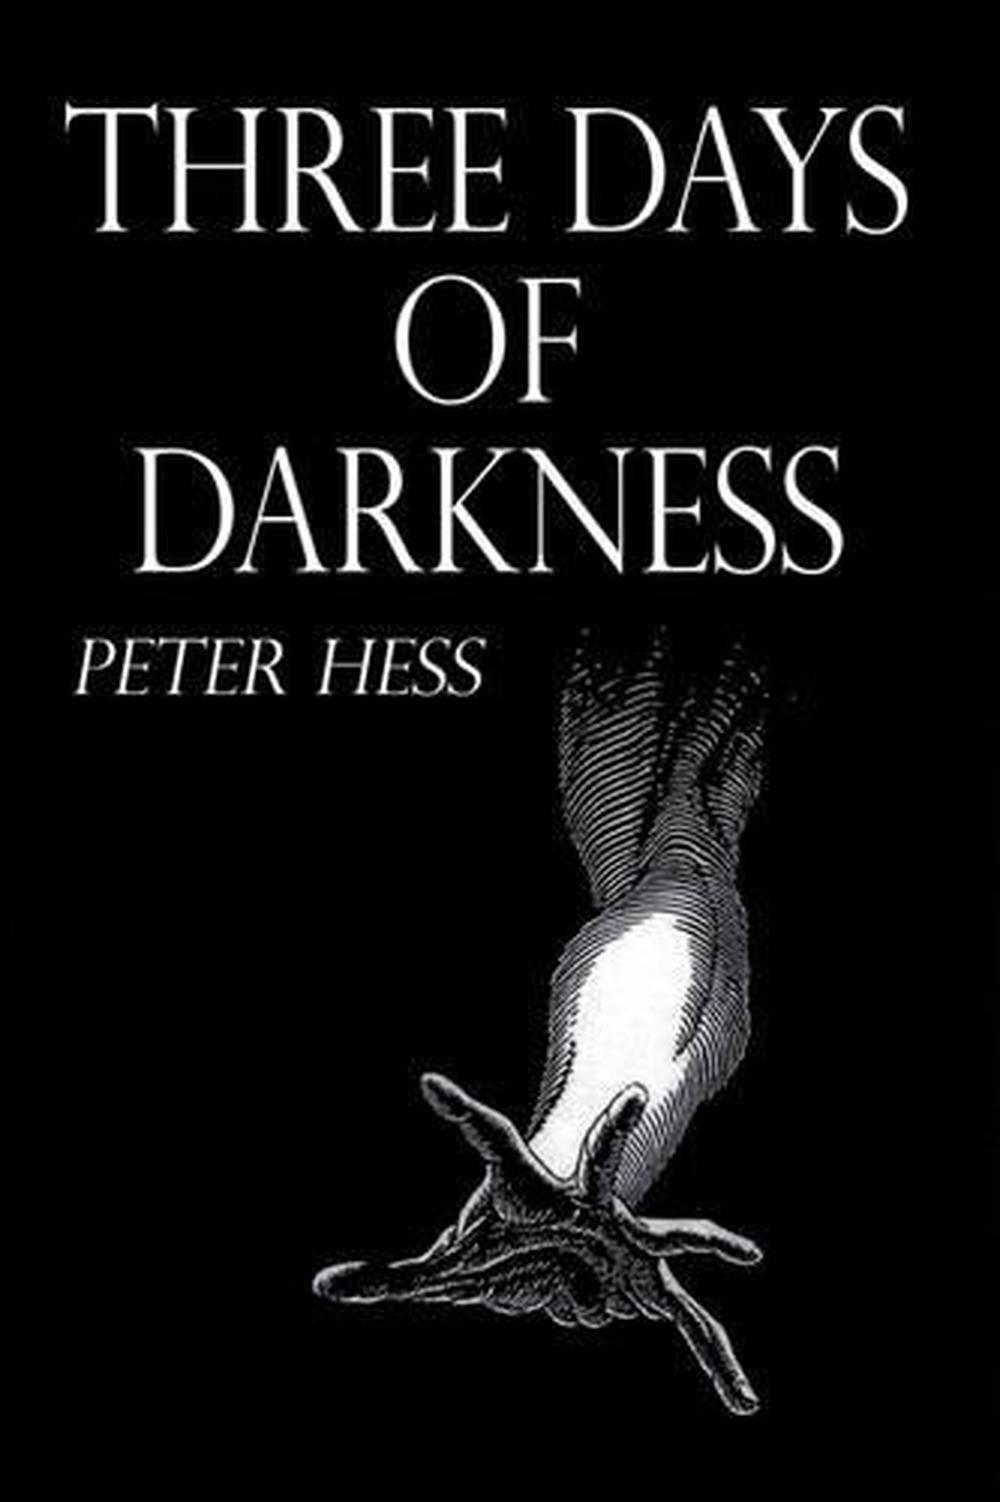 Three Days of Darkness by Peter Hess (English) Paperback Book Free